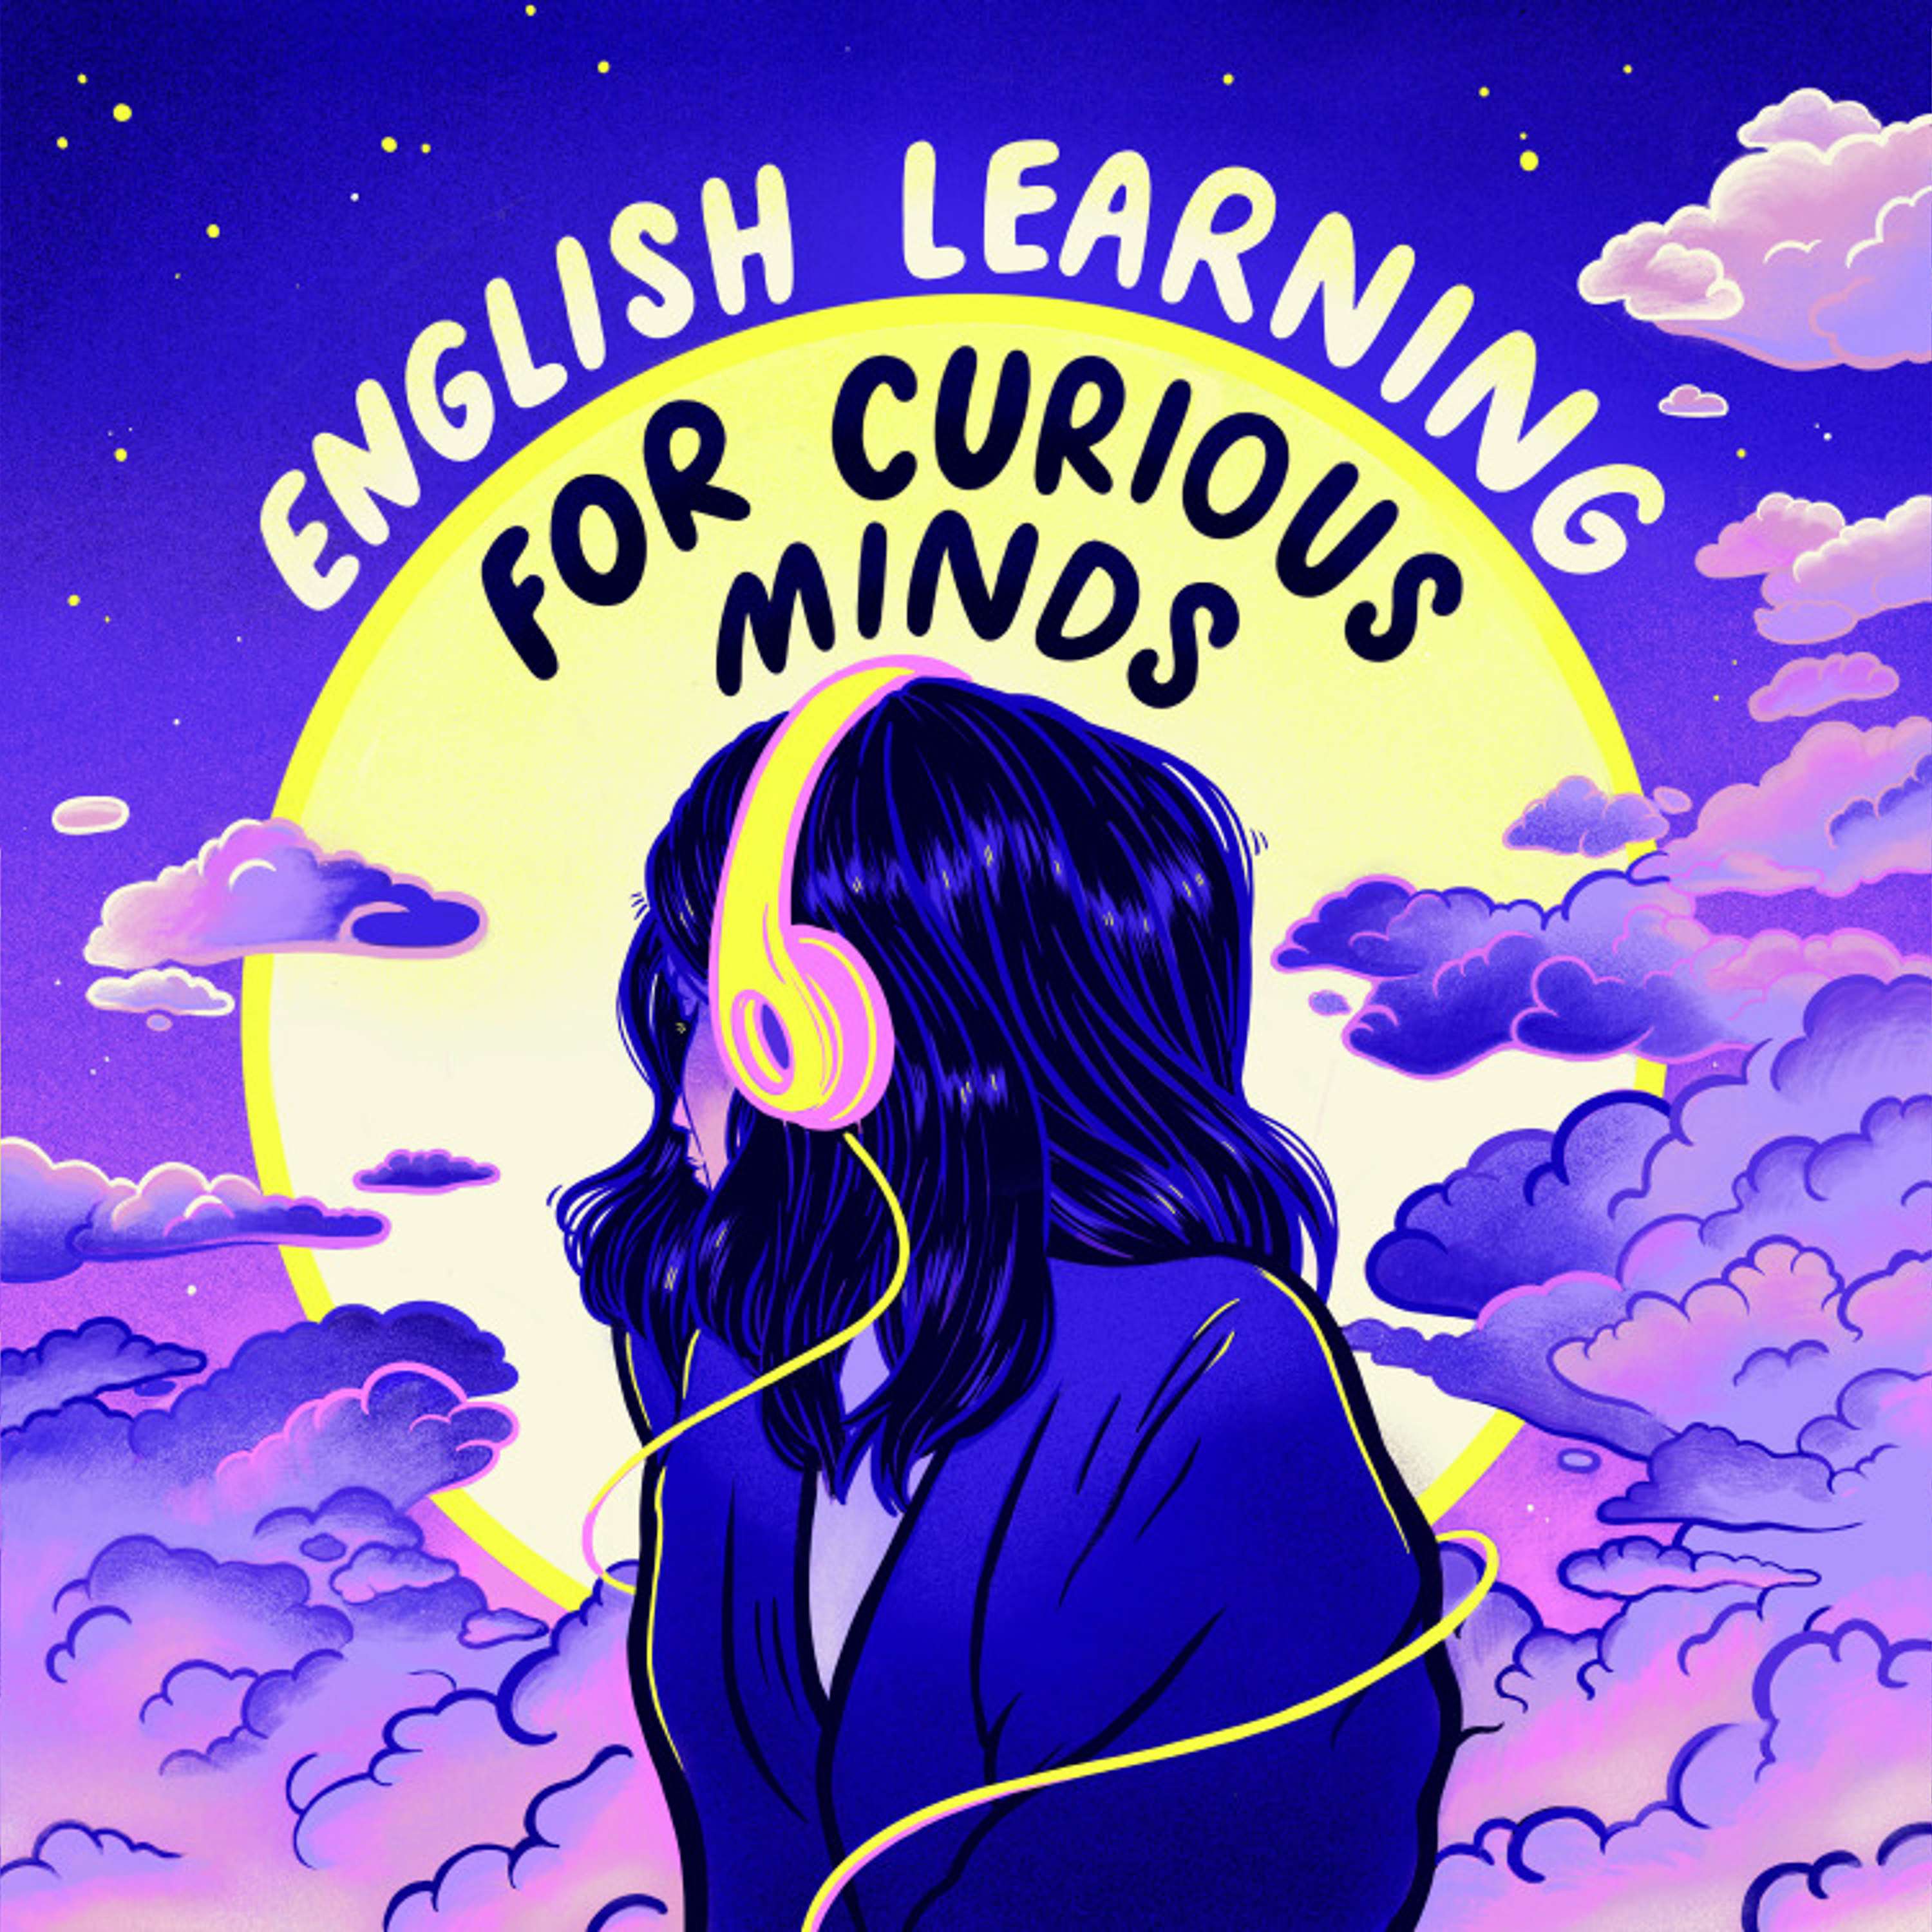 #378 | [2023] Meet the English Learning for Curious Minds podcast